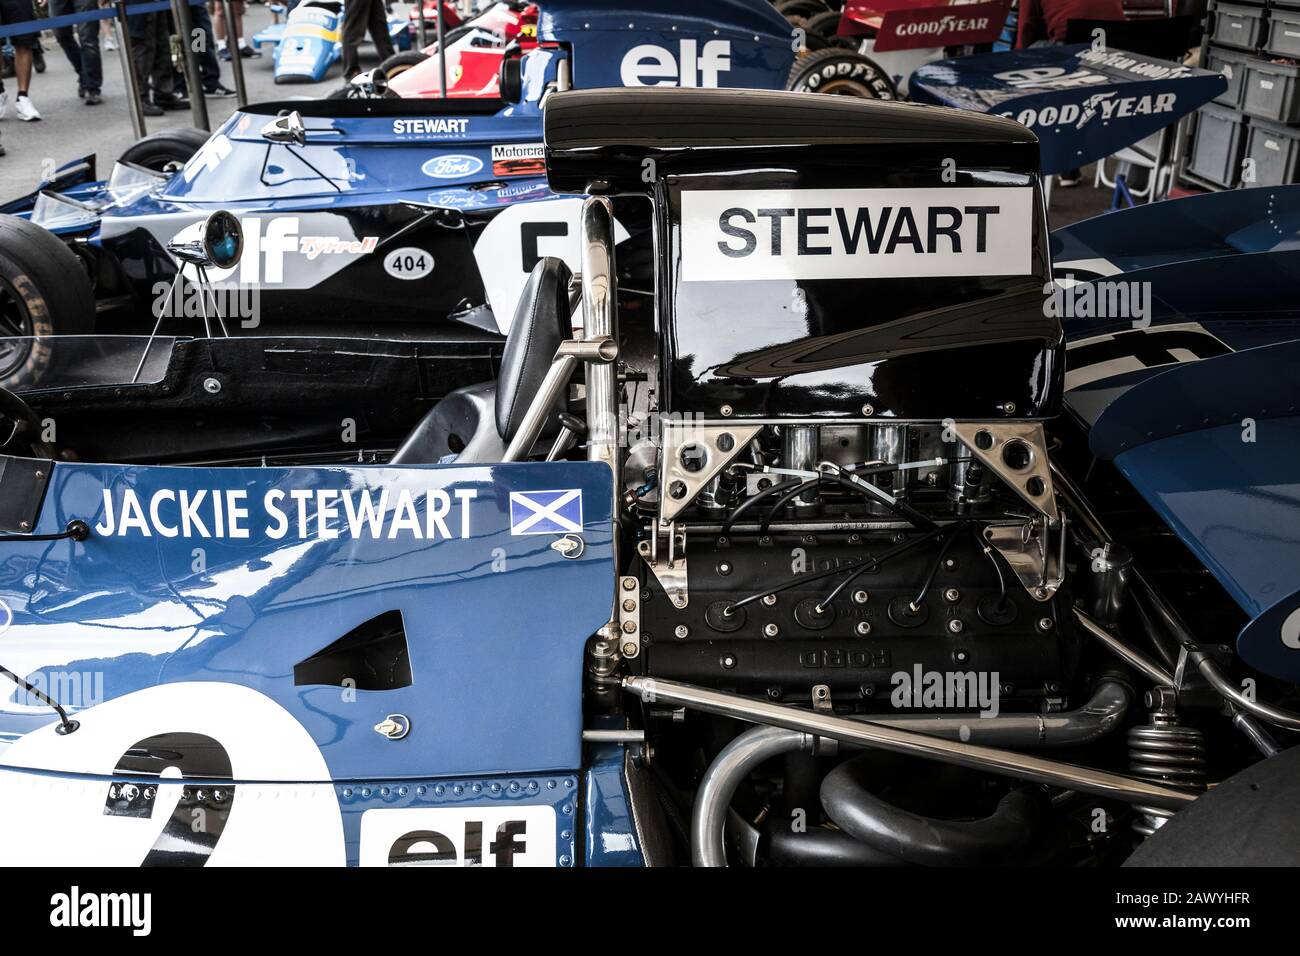 Three of Jackie Stewart's Tyrrell F1 racing cars in the pits at the 2018 Goodwood Festival of Speed. Stock Photo